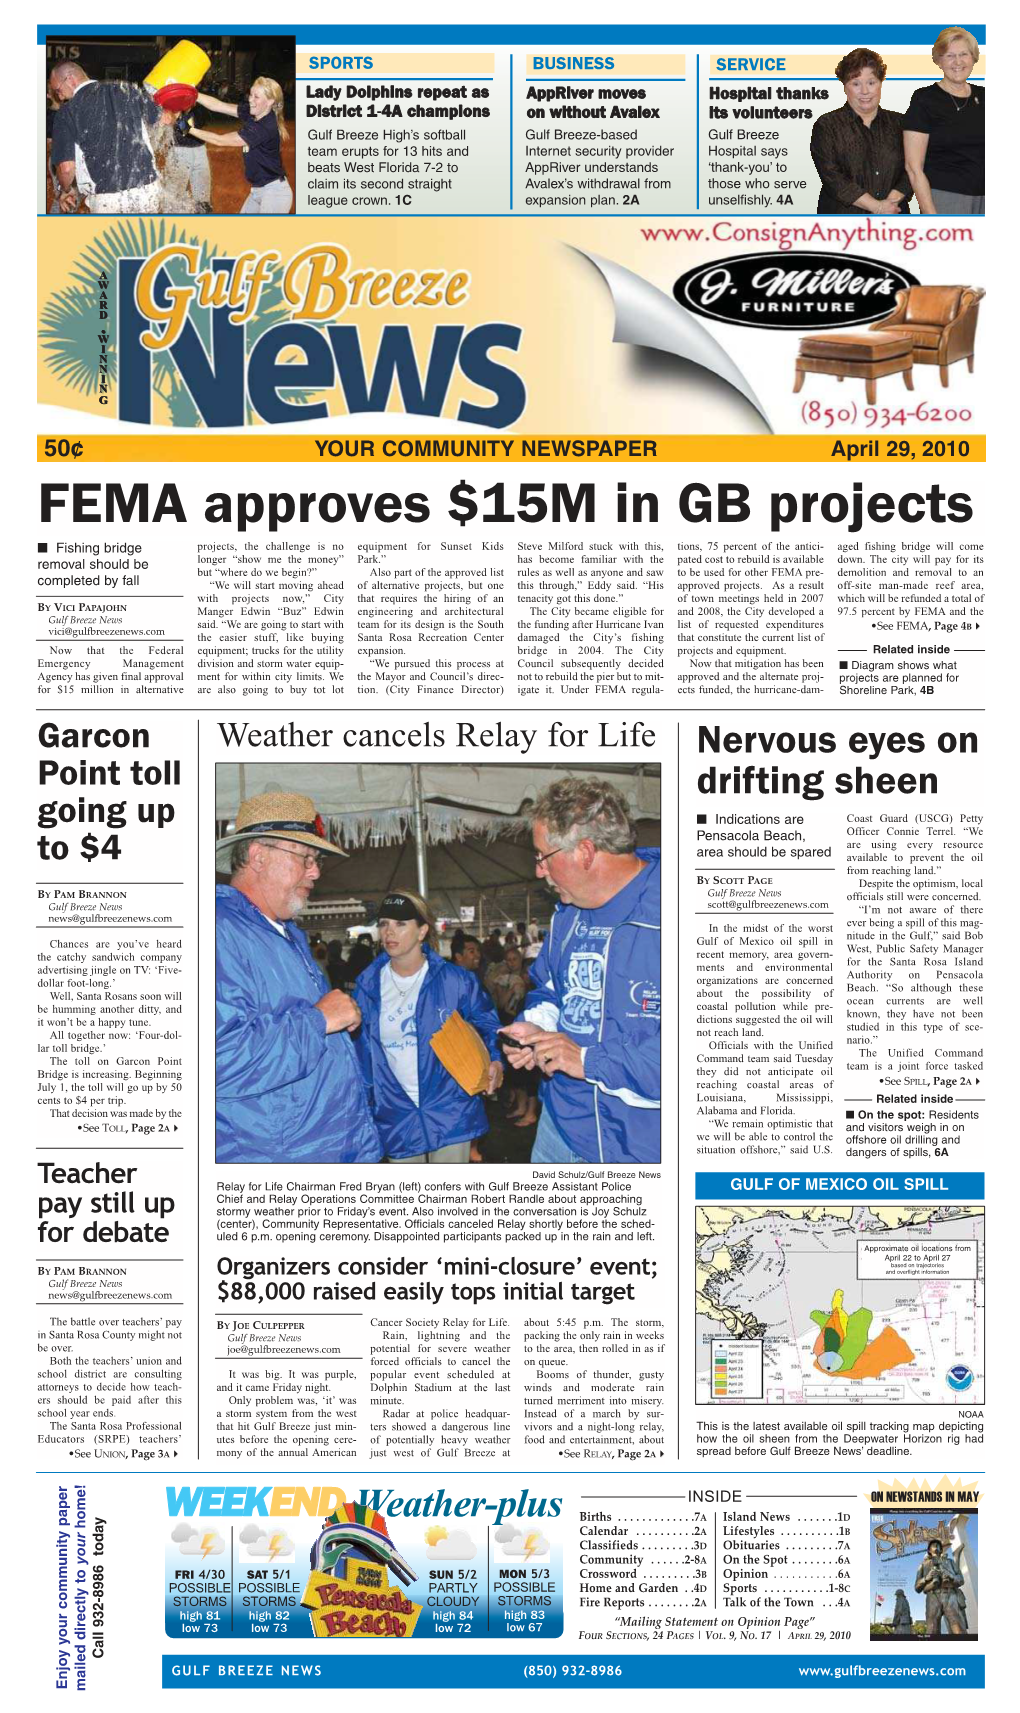 FEMA Approves $15M in GB Projects